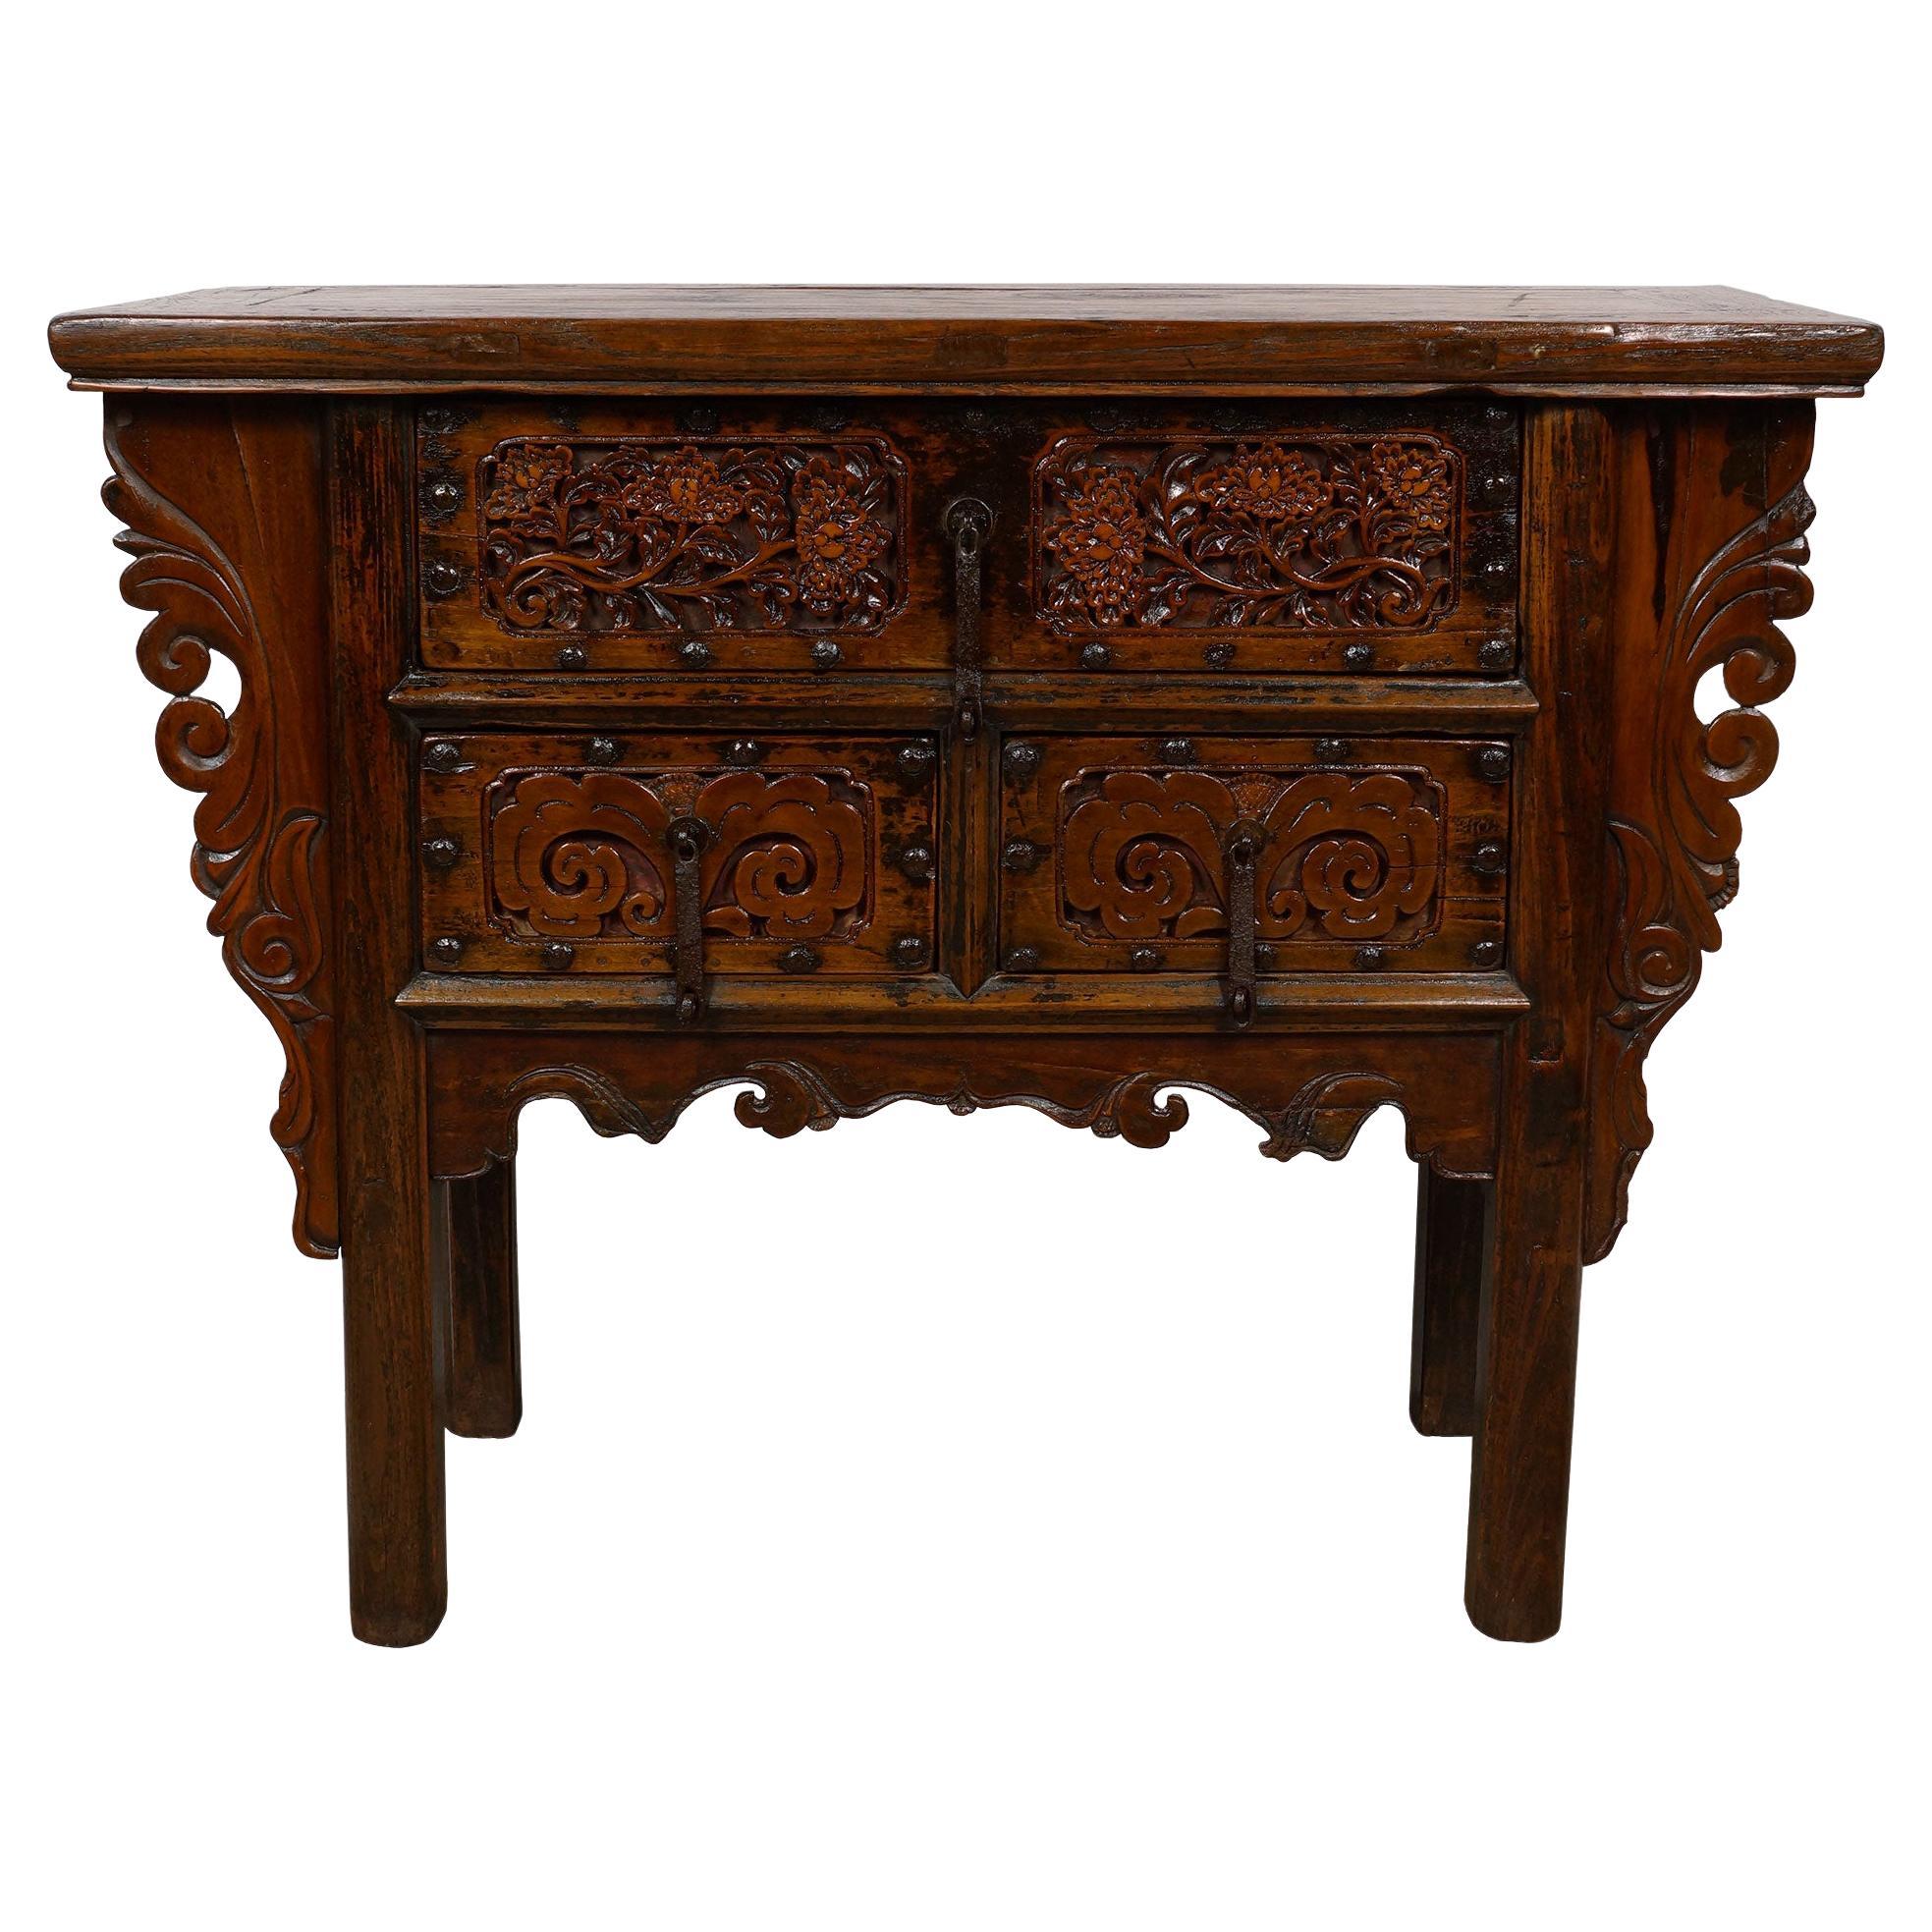 19th Century Antique Chinese Massive Carved Shan xi Console Table/Sideboard For Sale